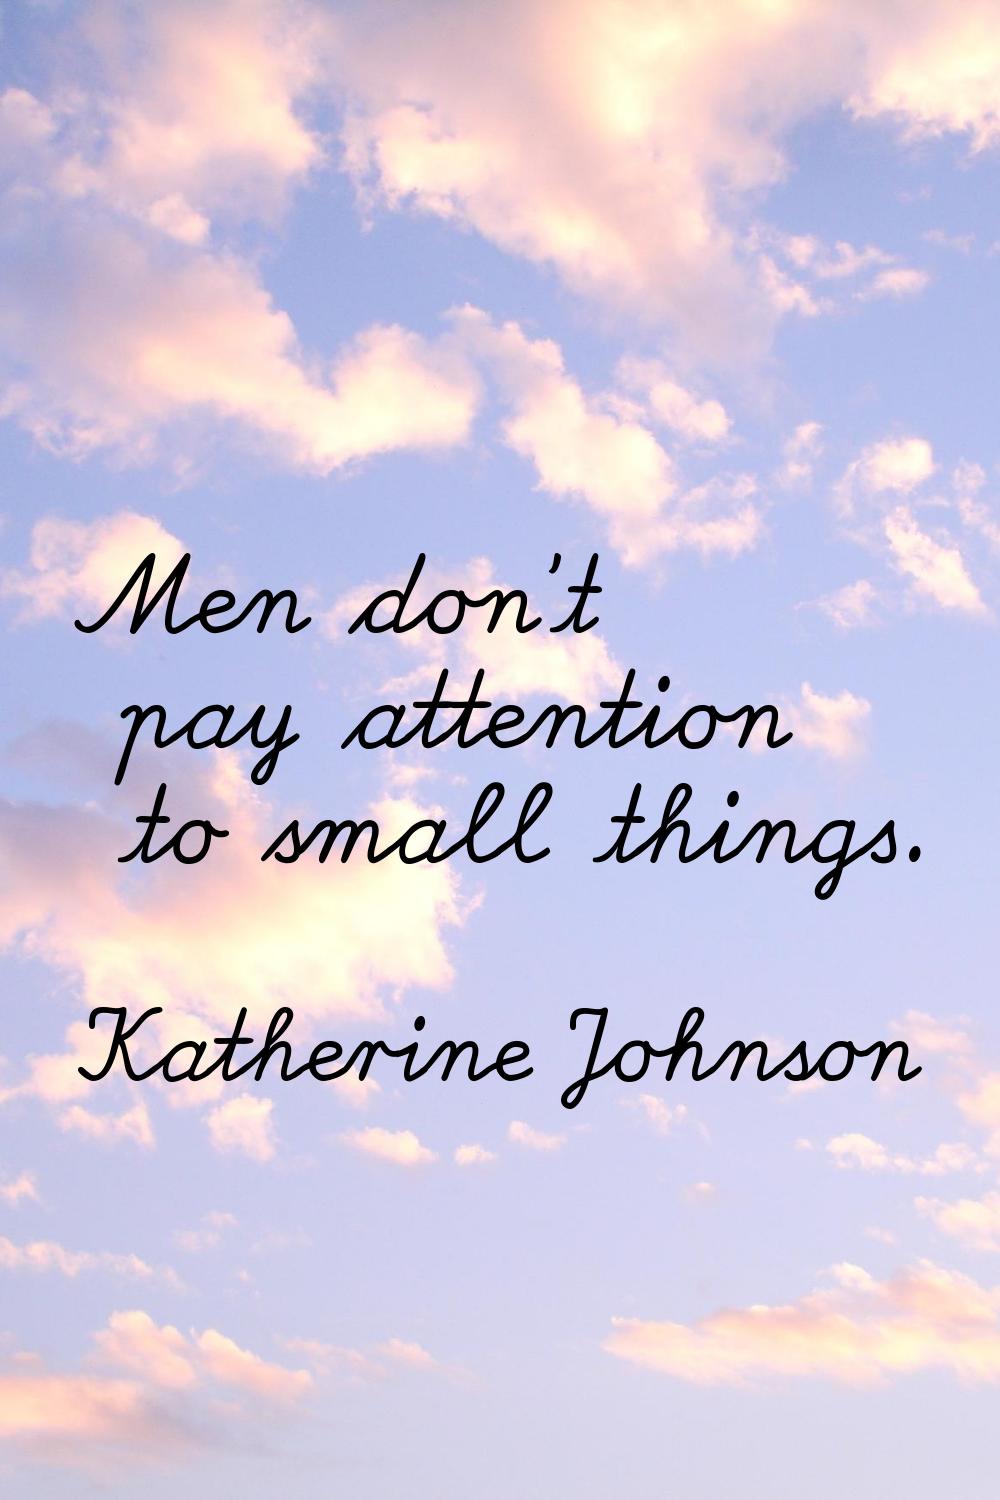 Men don't pay attention to small things.